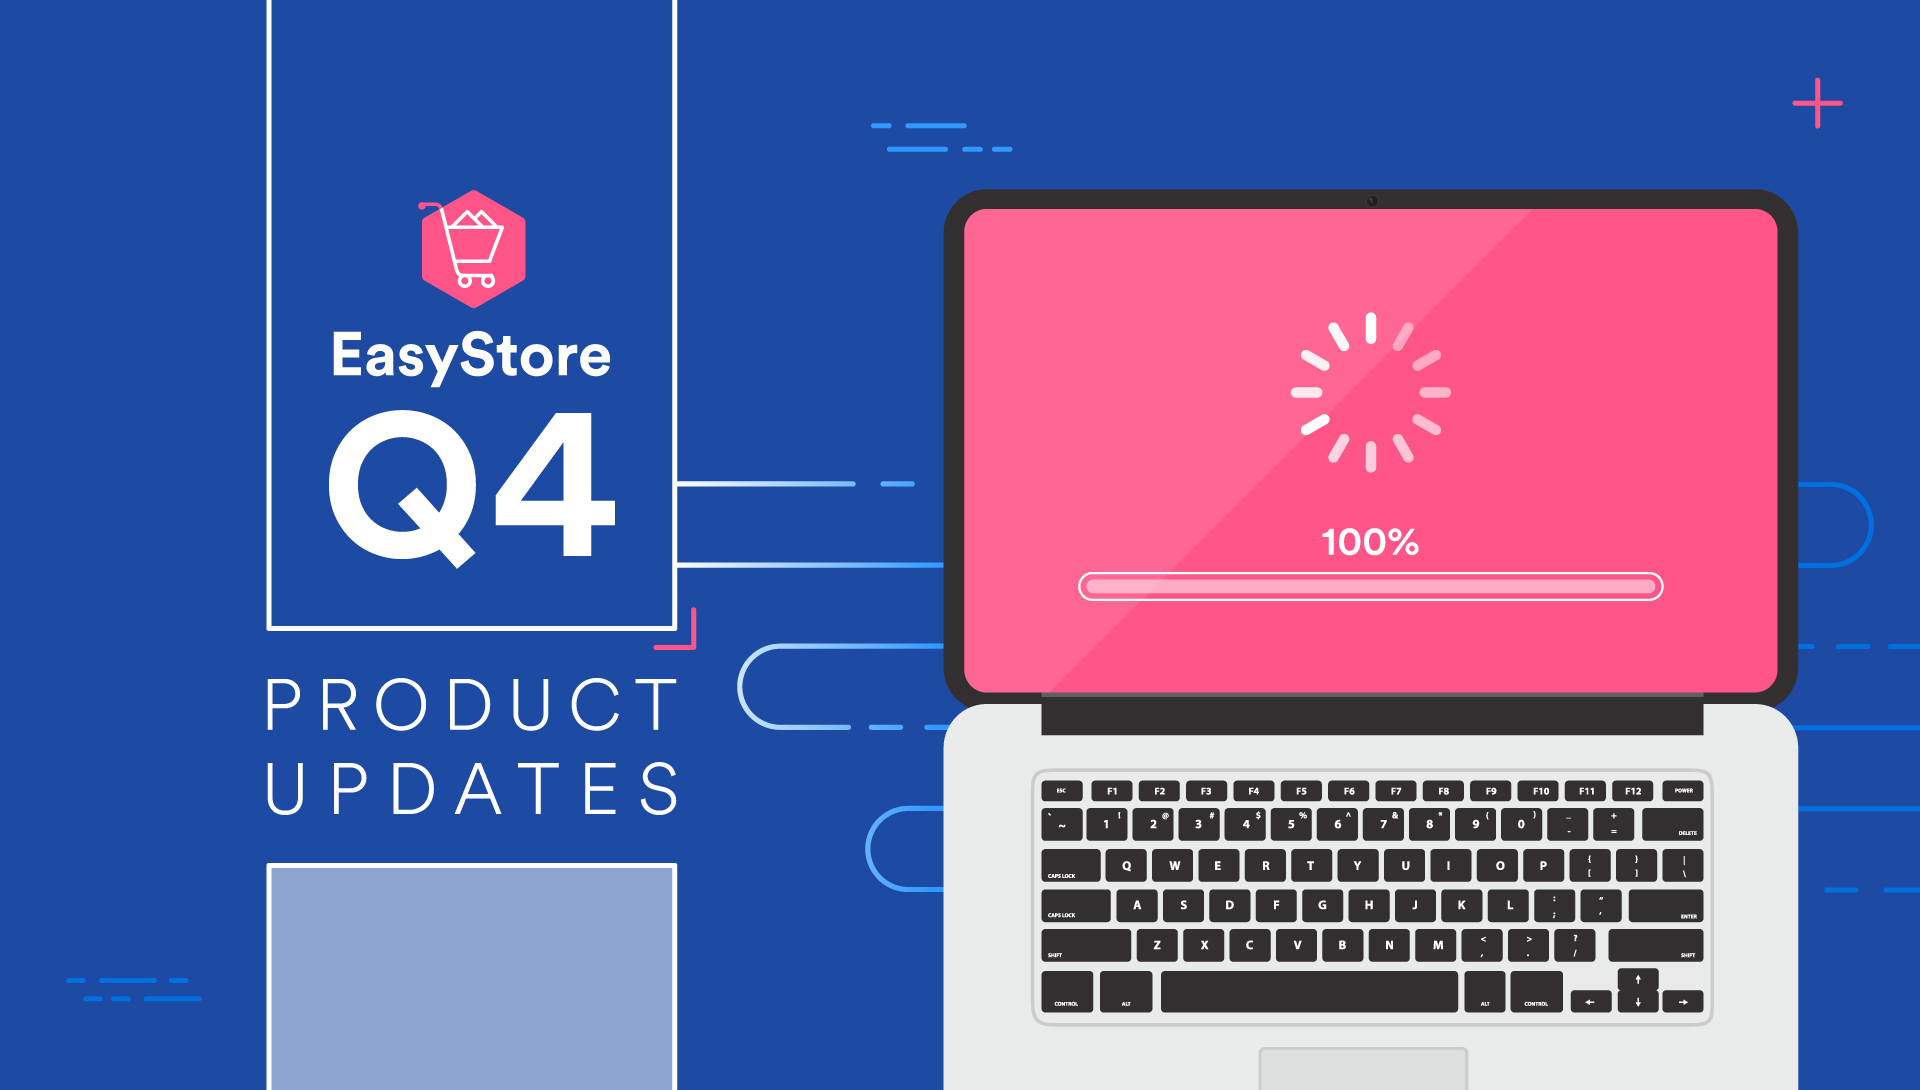 EasyStore Product Updates: October - December 2019 | EasyStore